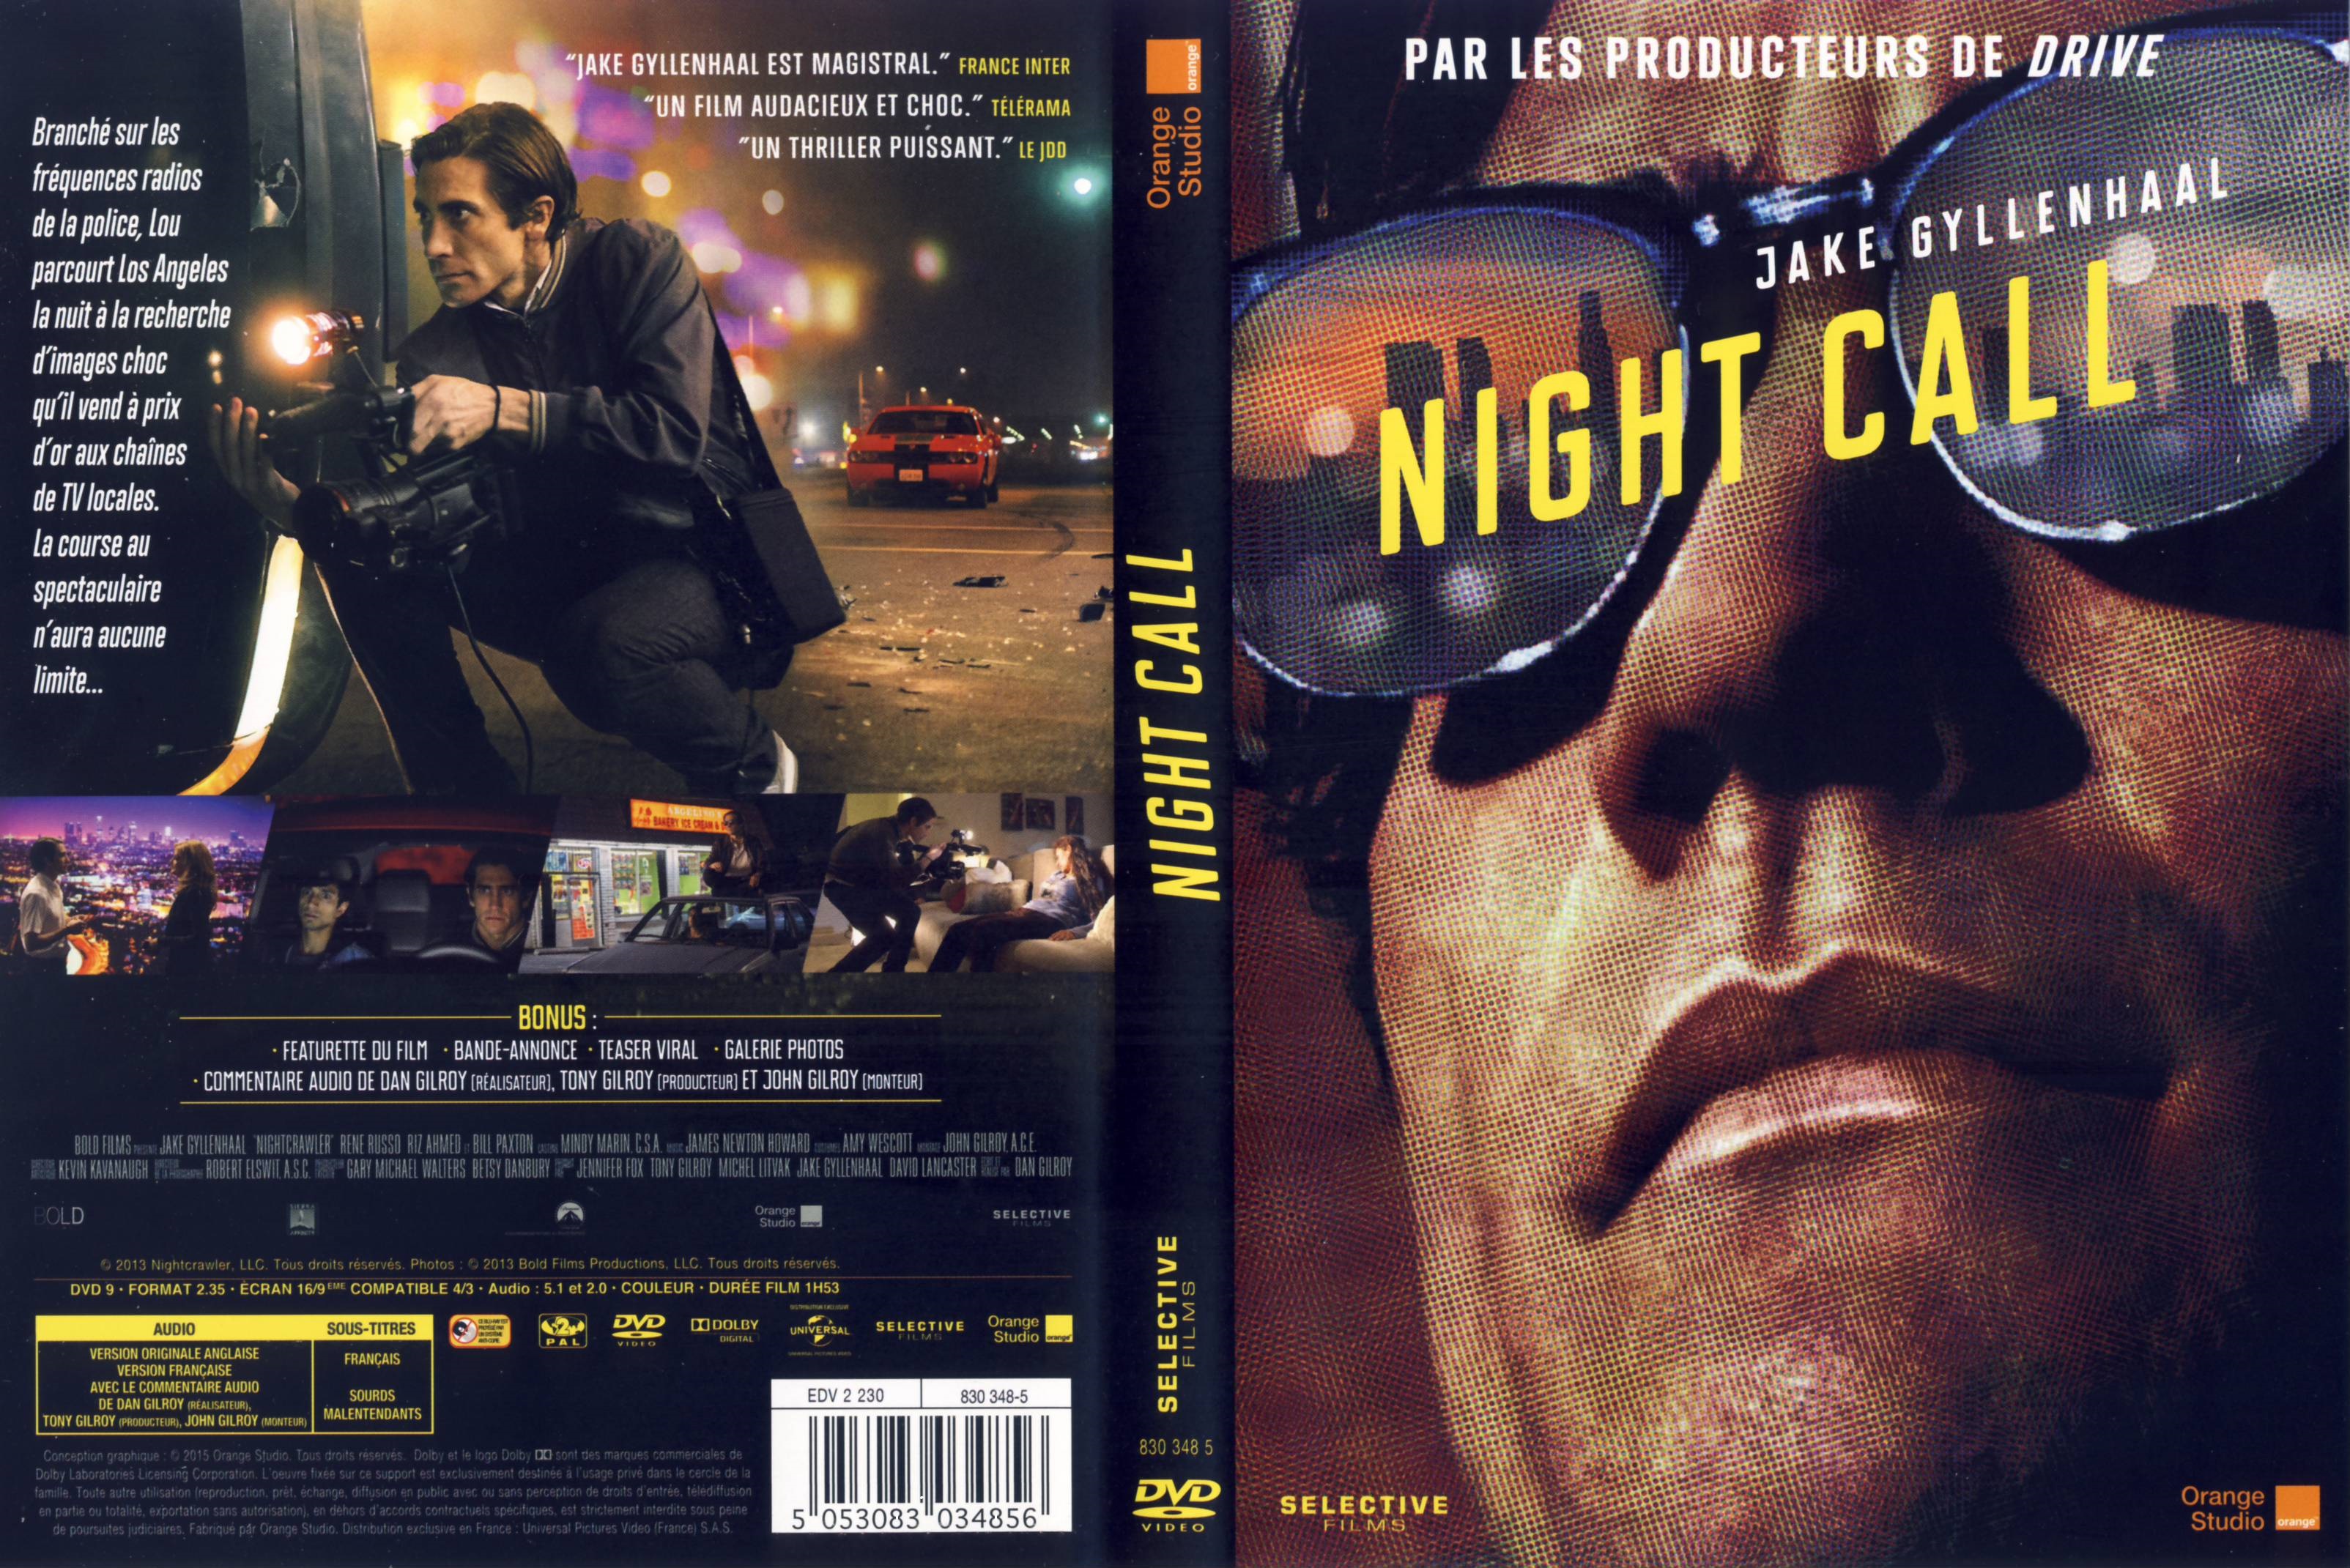 Jaquette DVD Night Call